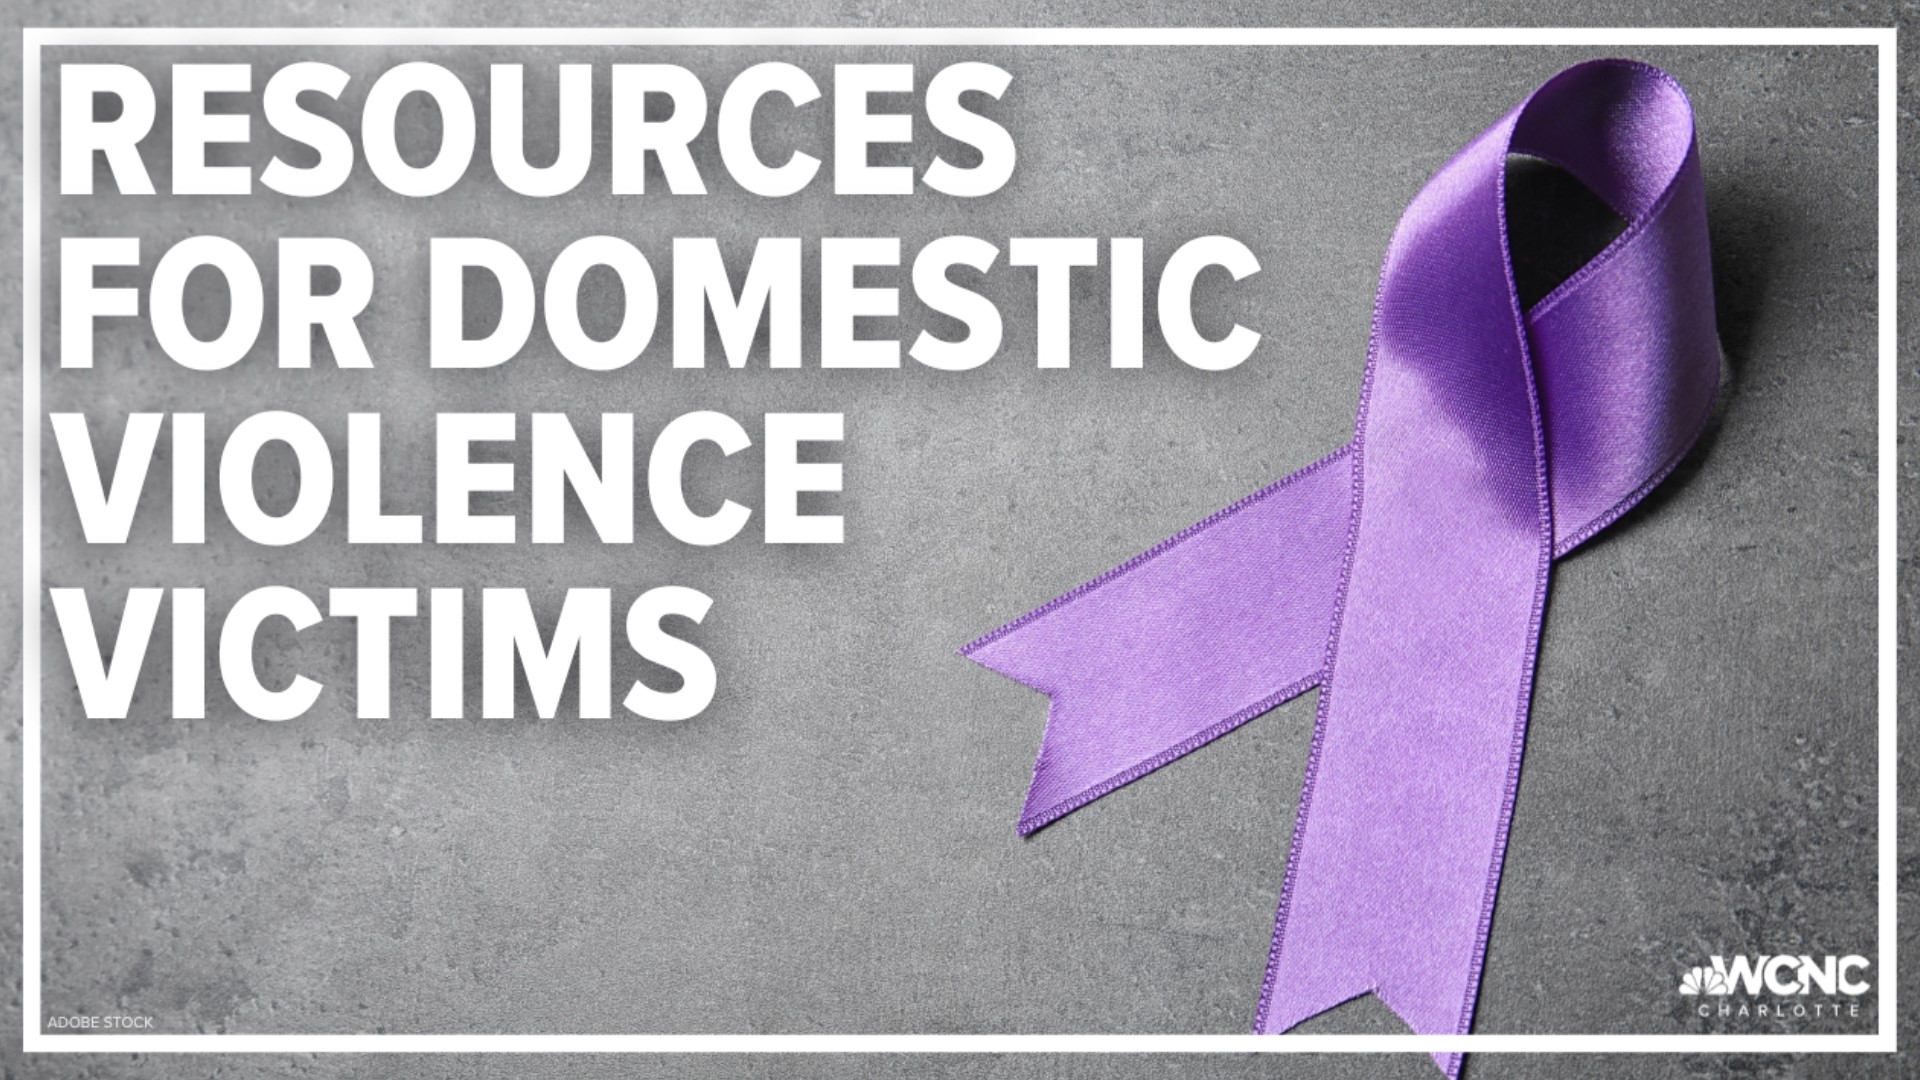 If you or a loved one is facing domestic violence, help is available. You can call the National Domestic Violence Hotline at 800-799-7233 or text START to 88788.